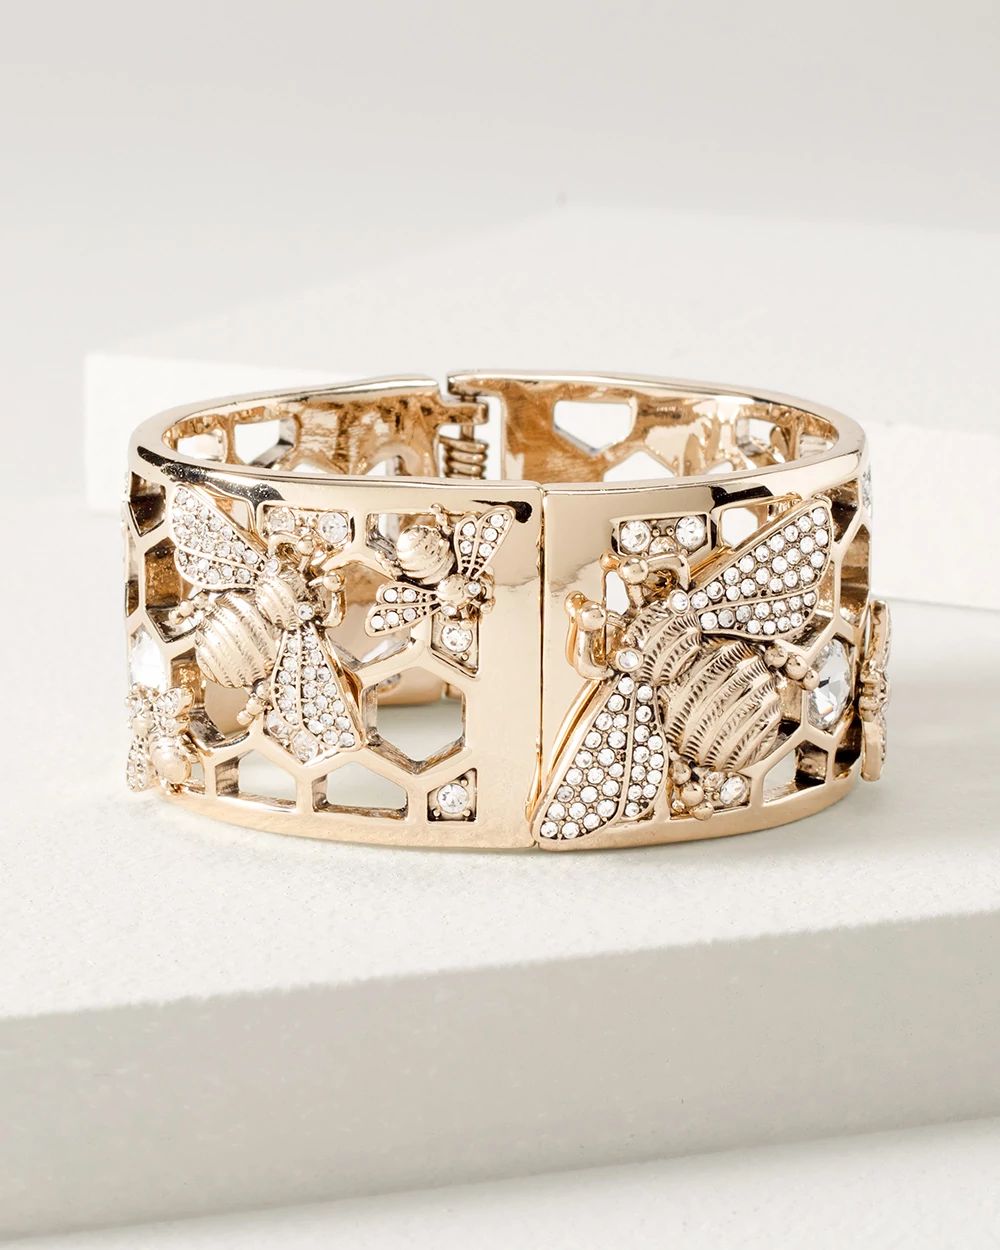 Goldtone & Crystal Bee Cuff Bracelet click to view larger image.